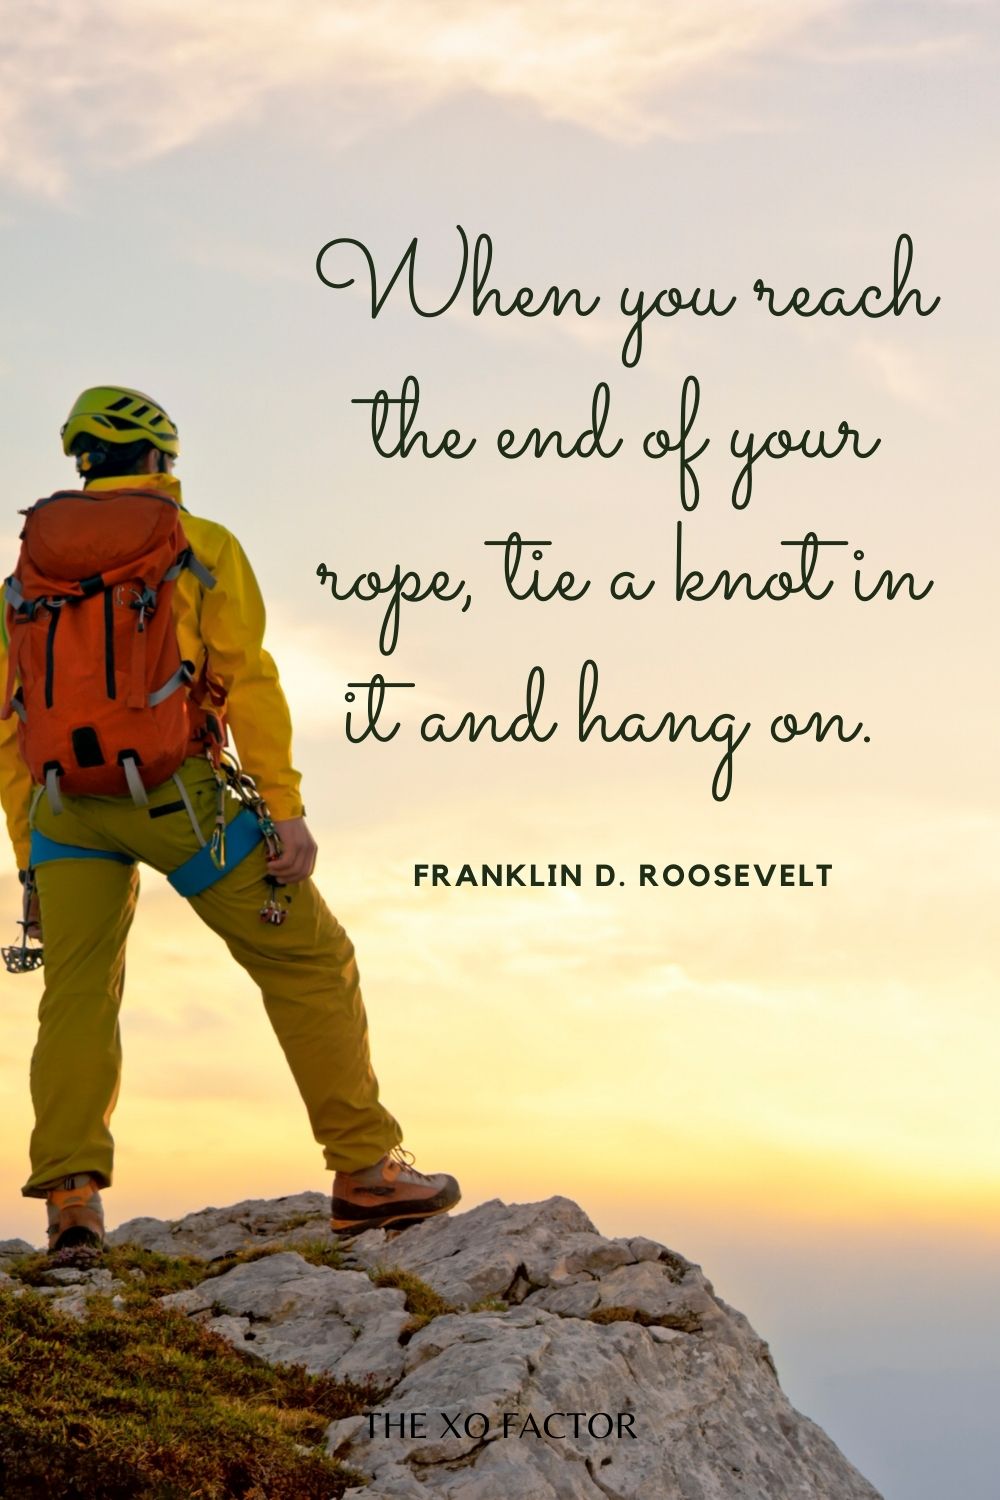 When you reach the end of your rope, tie a knot in it and hang on.  Franklin D. Roosevelt